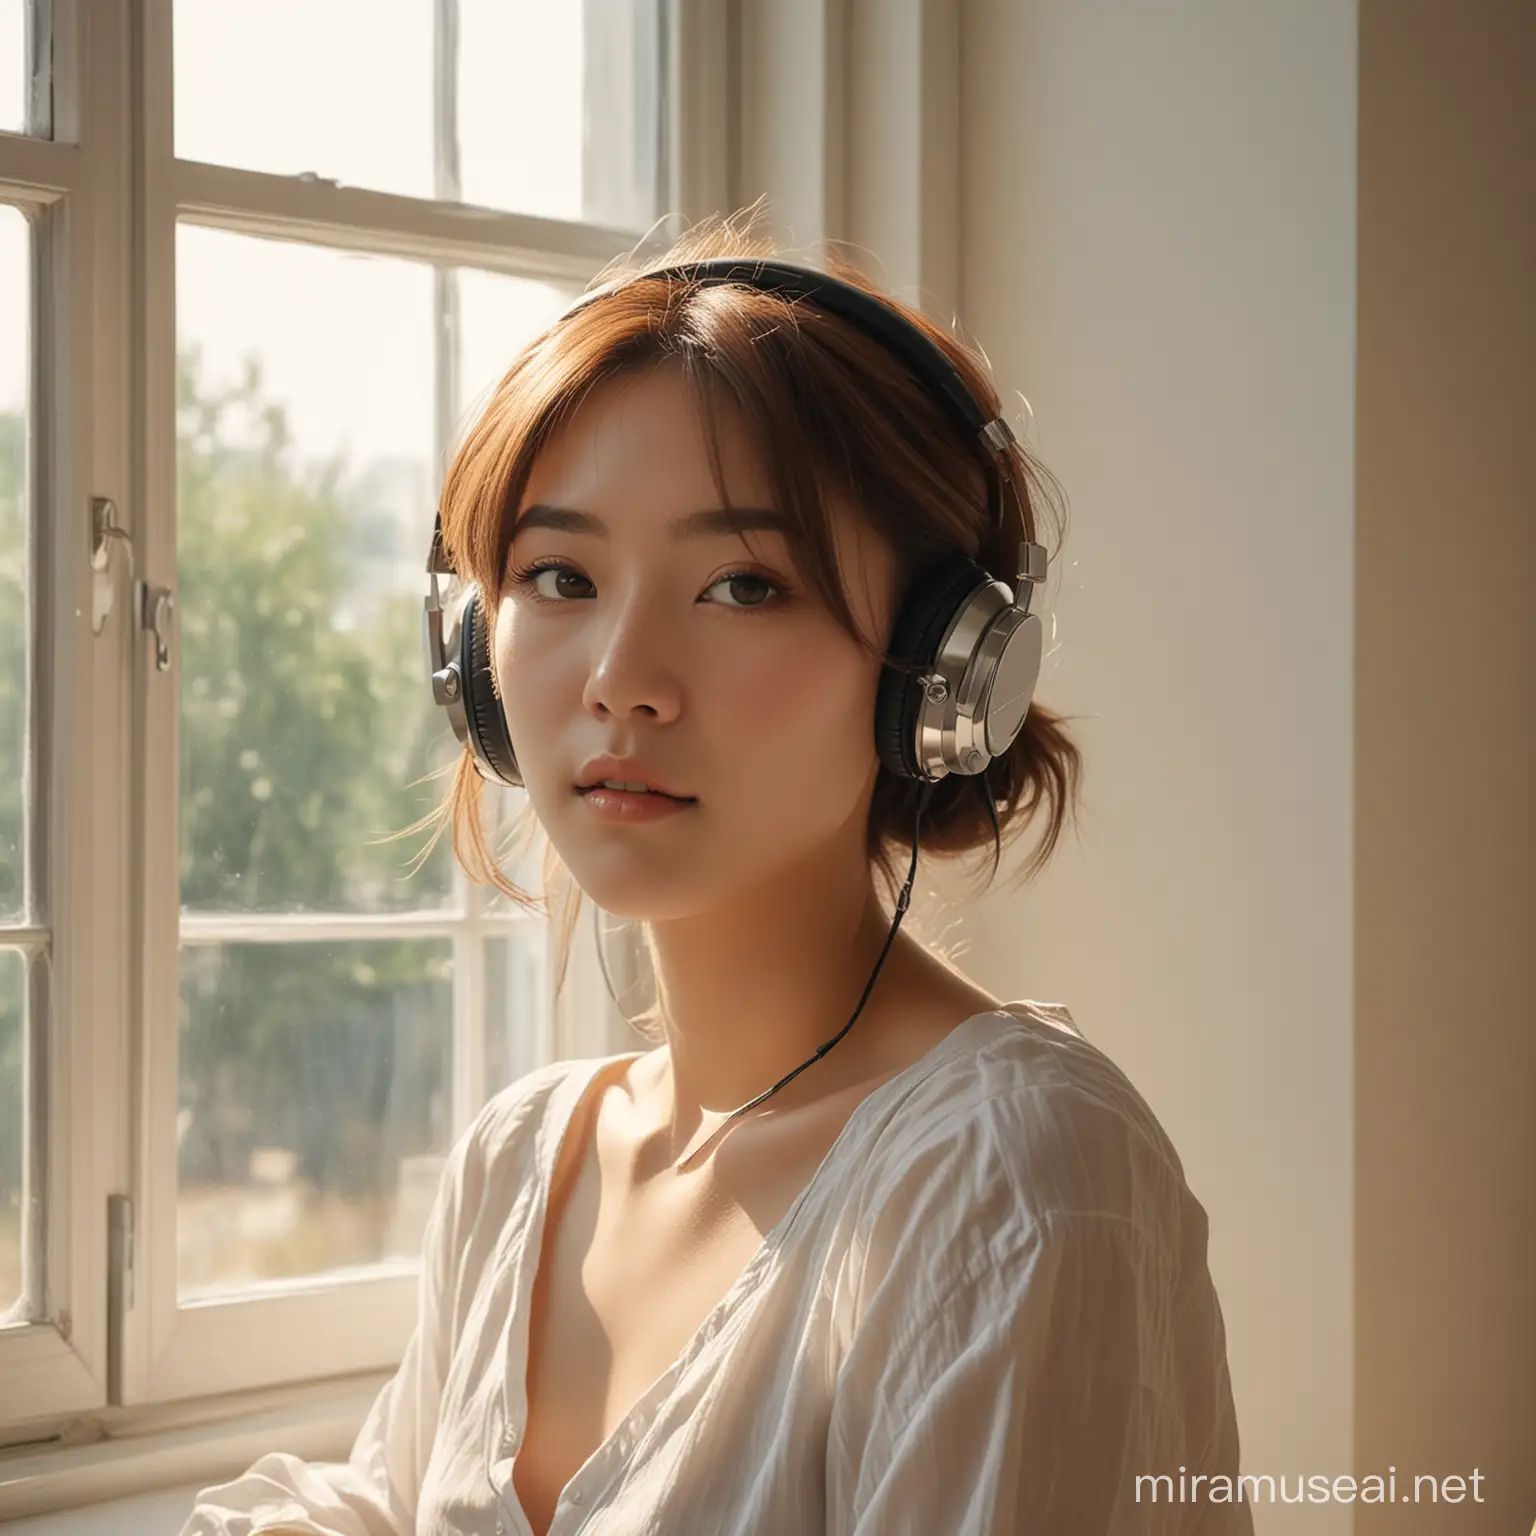 Contemplative KPop Girl with Vintage Headset Bathed in Sunlight